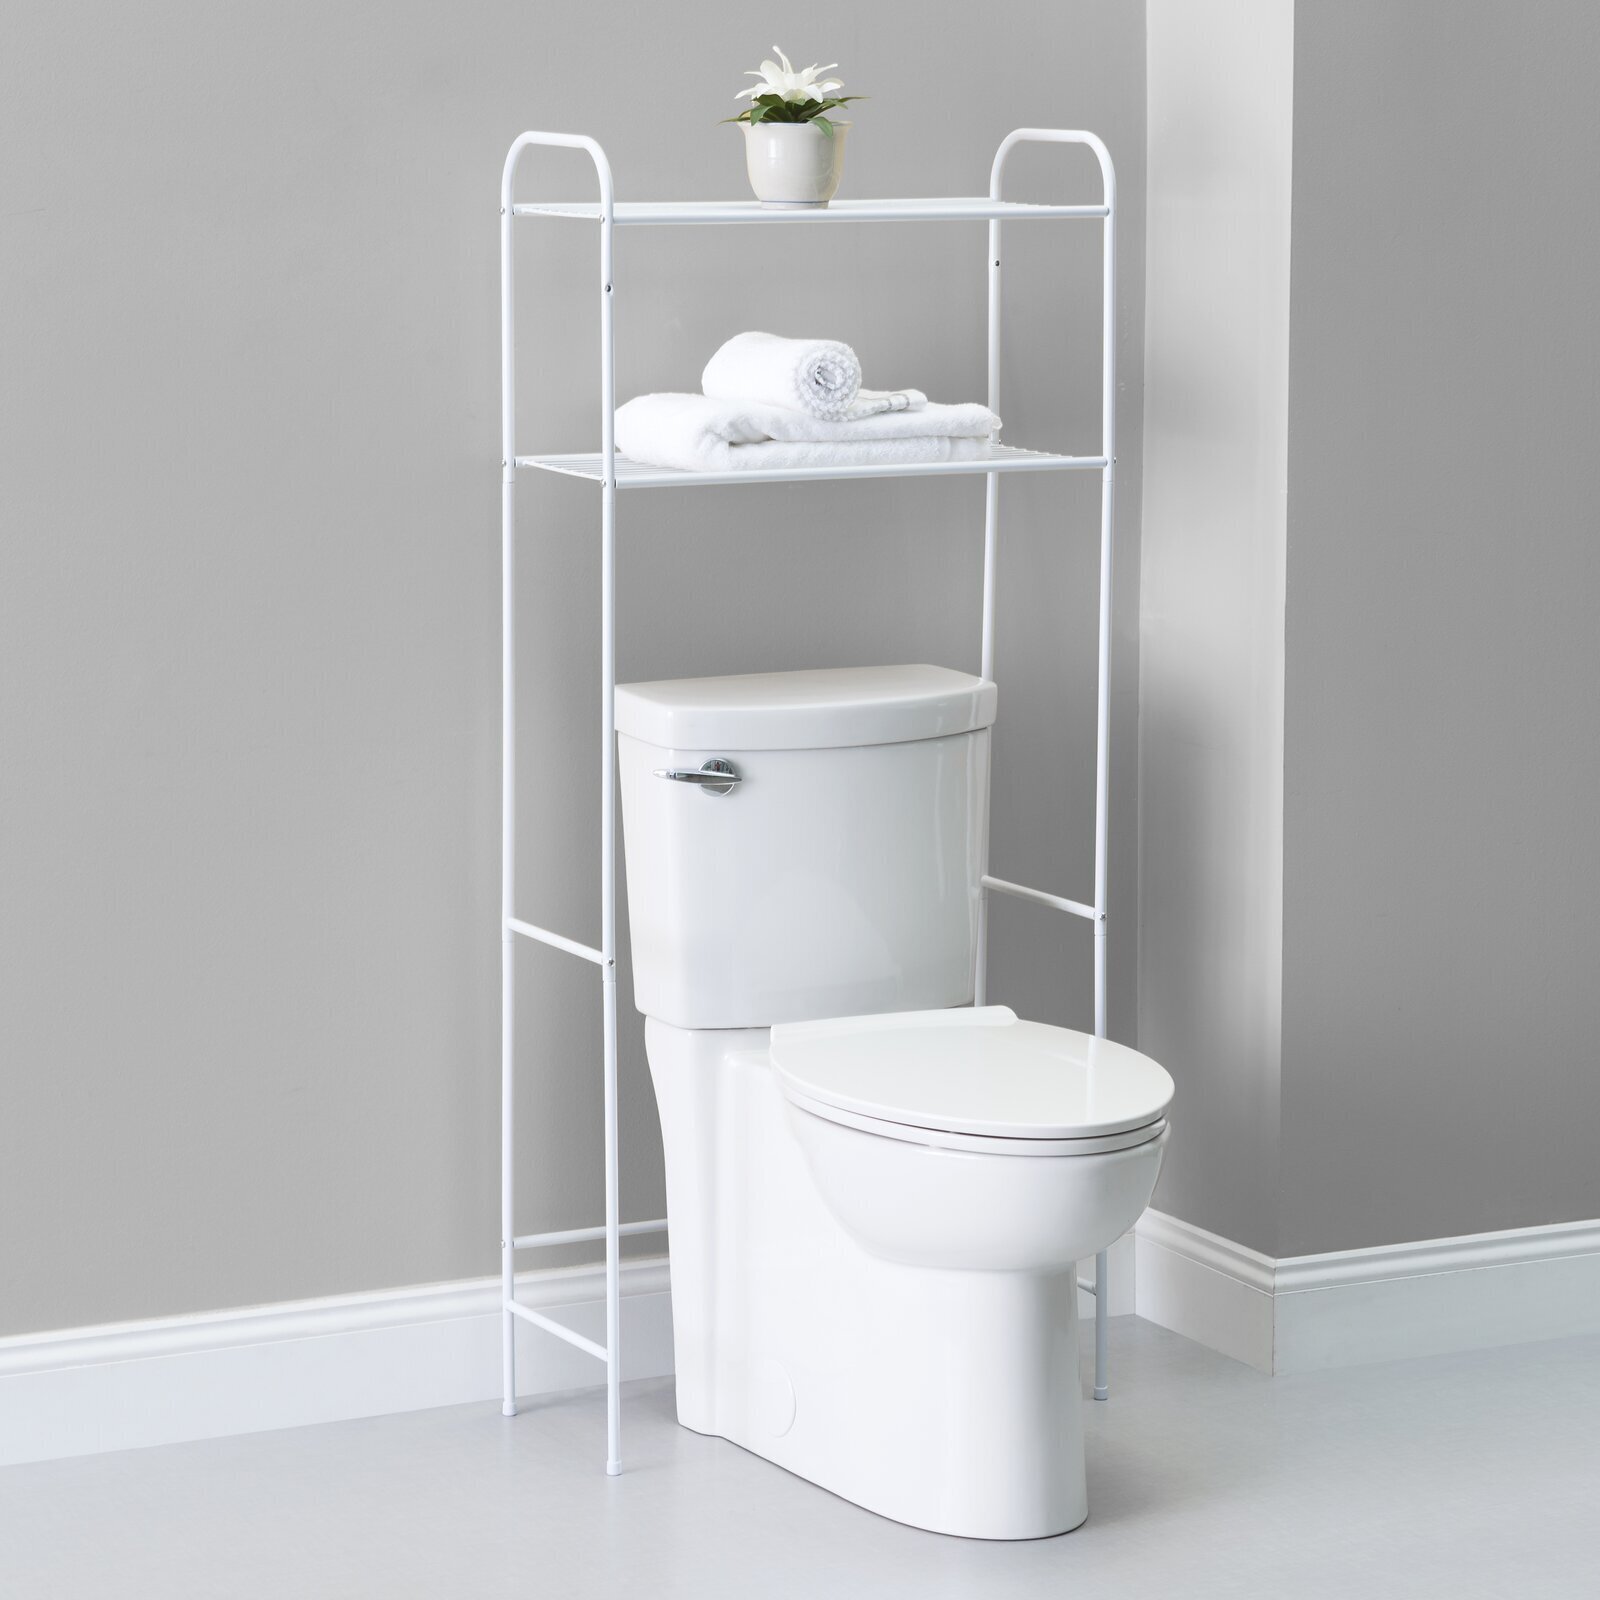 Small over the toilet storage